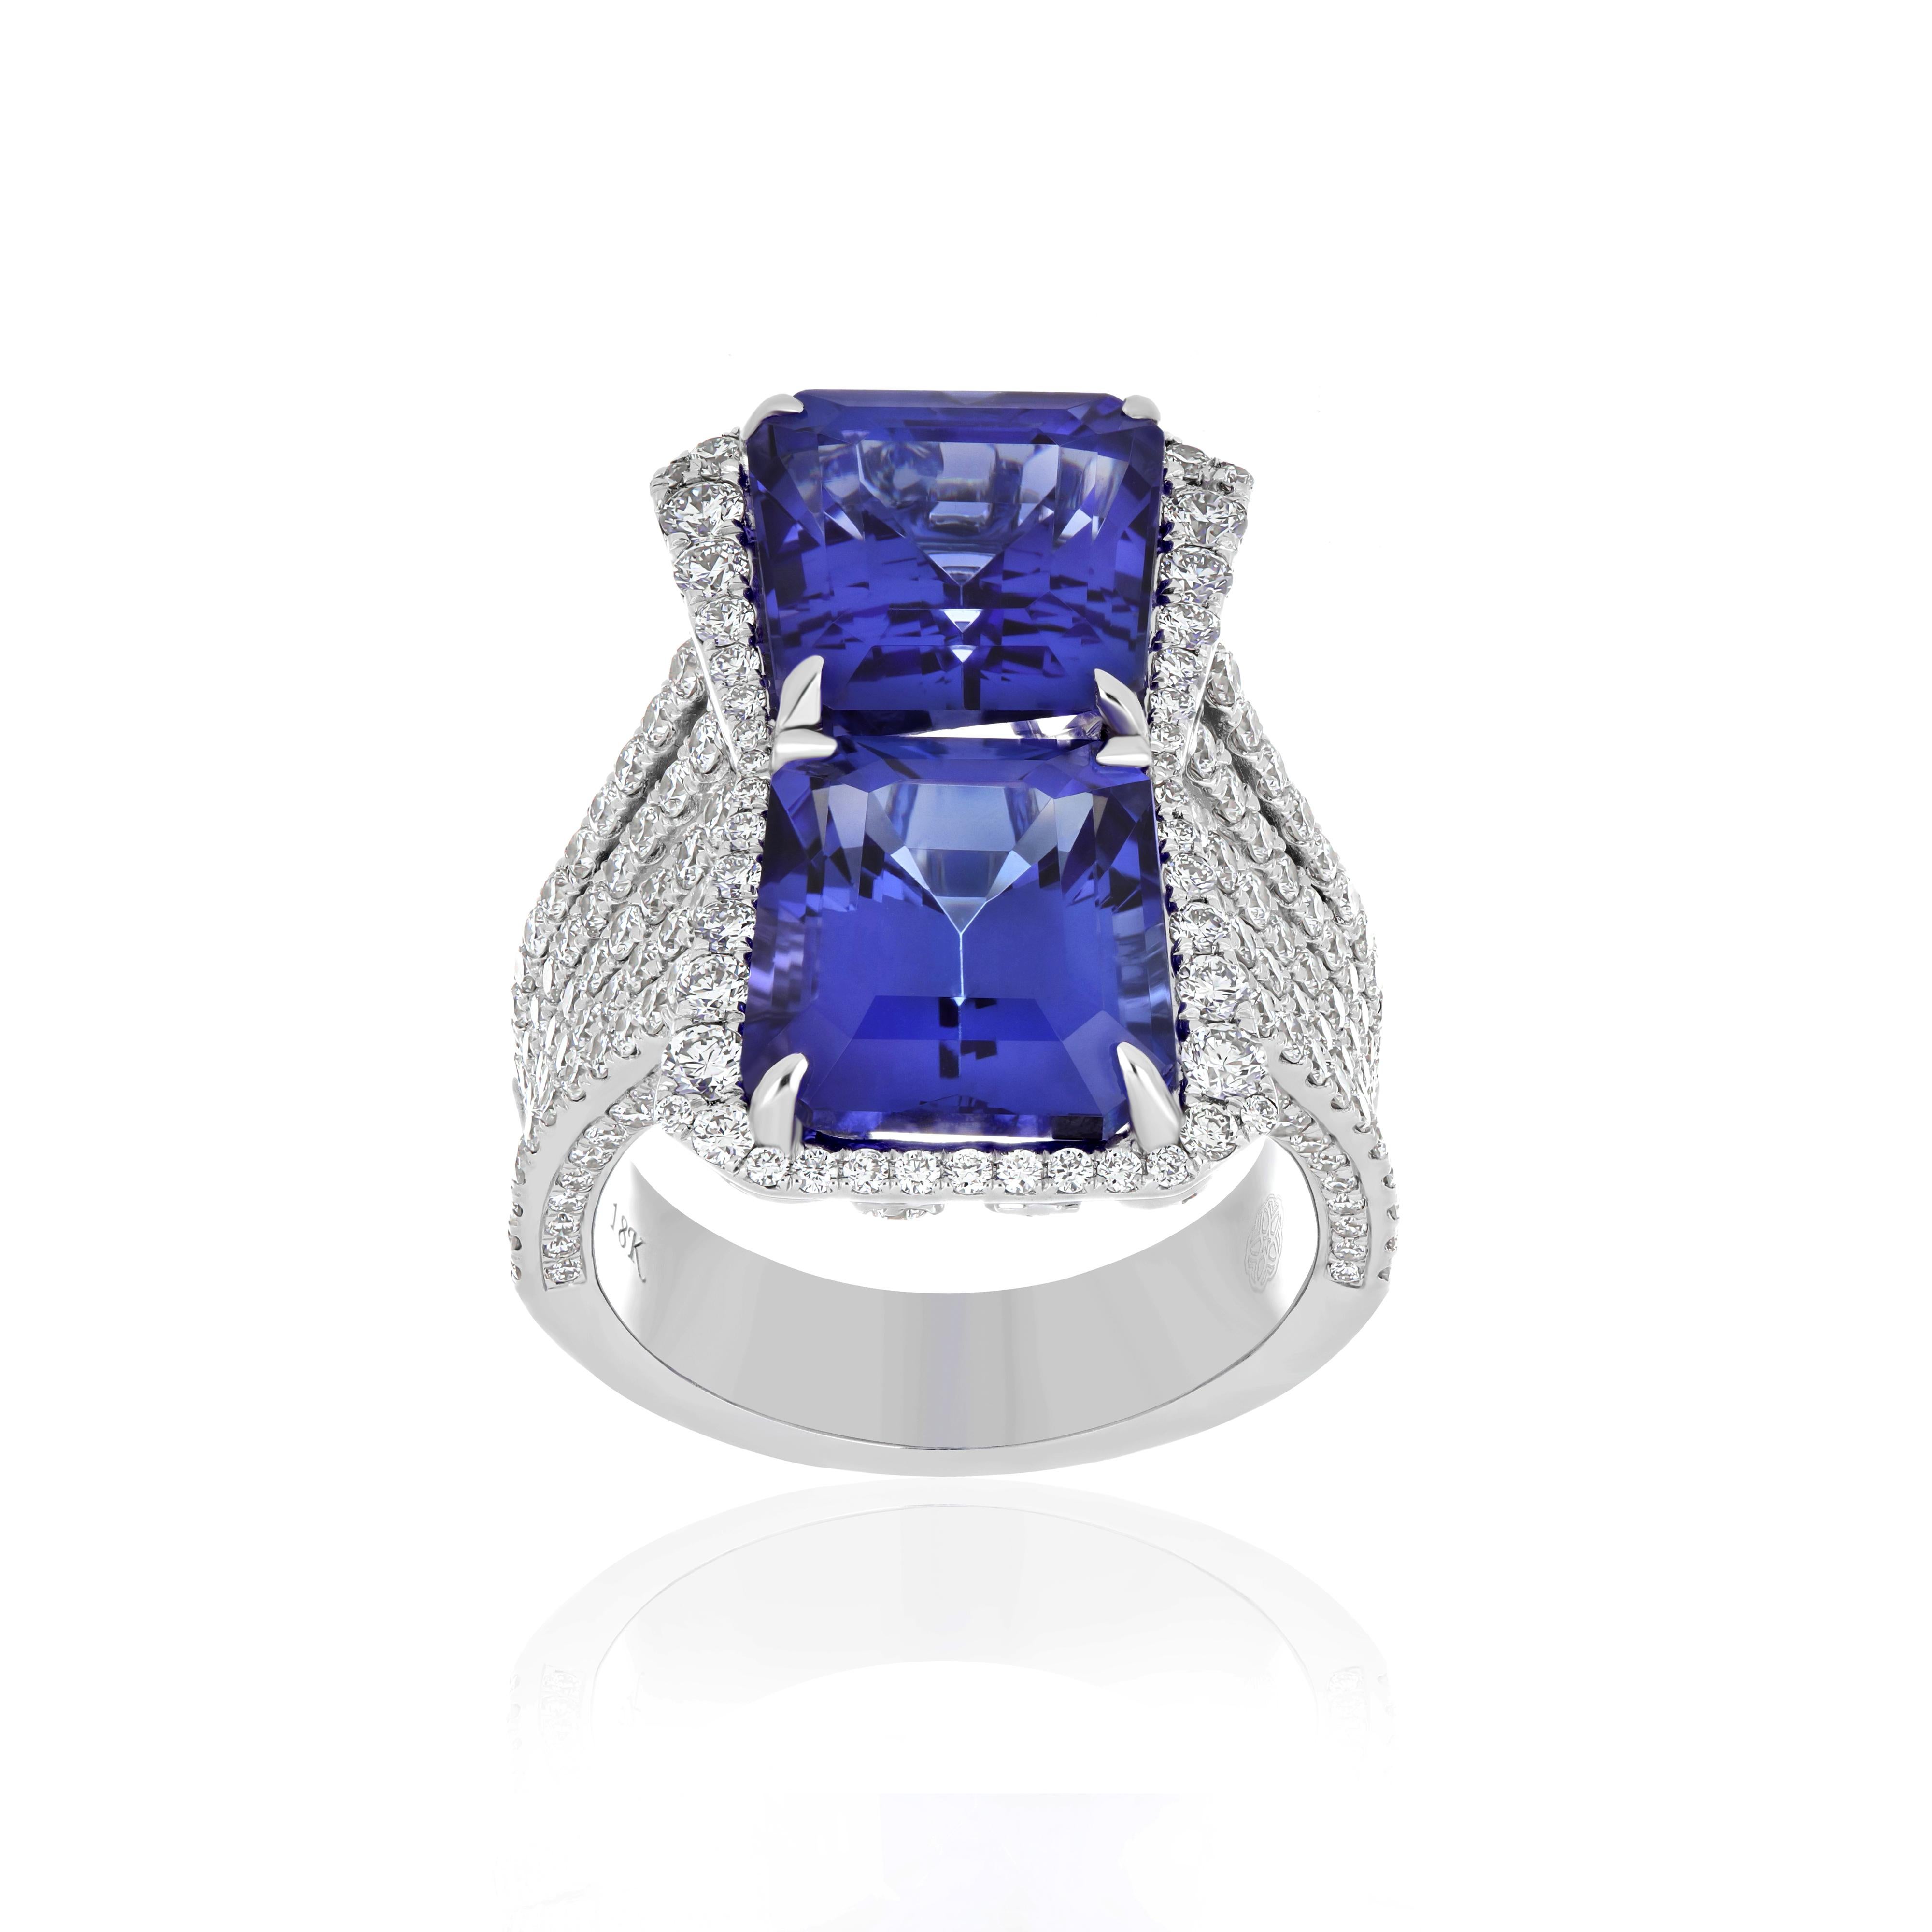 Elegant and Exquisitely detailed White Gold Ring, with 12.80 Cts (approx total Carat weight) Two Octagon Cut Tanzanite set in the center with Micro pave set Diamonds, weighing approx. 2.2 Cts. (approx.) total carat weight to further enhance the